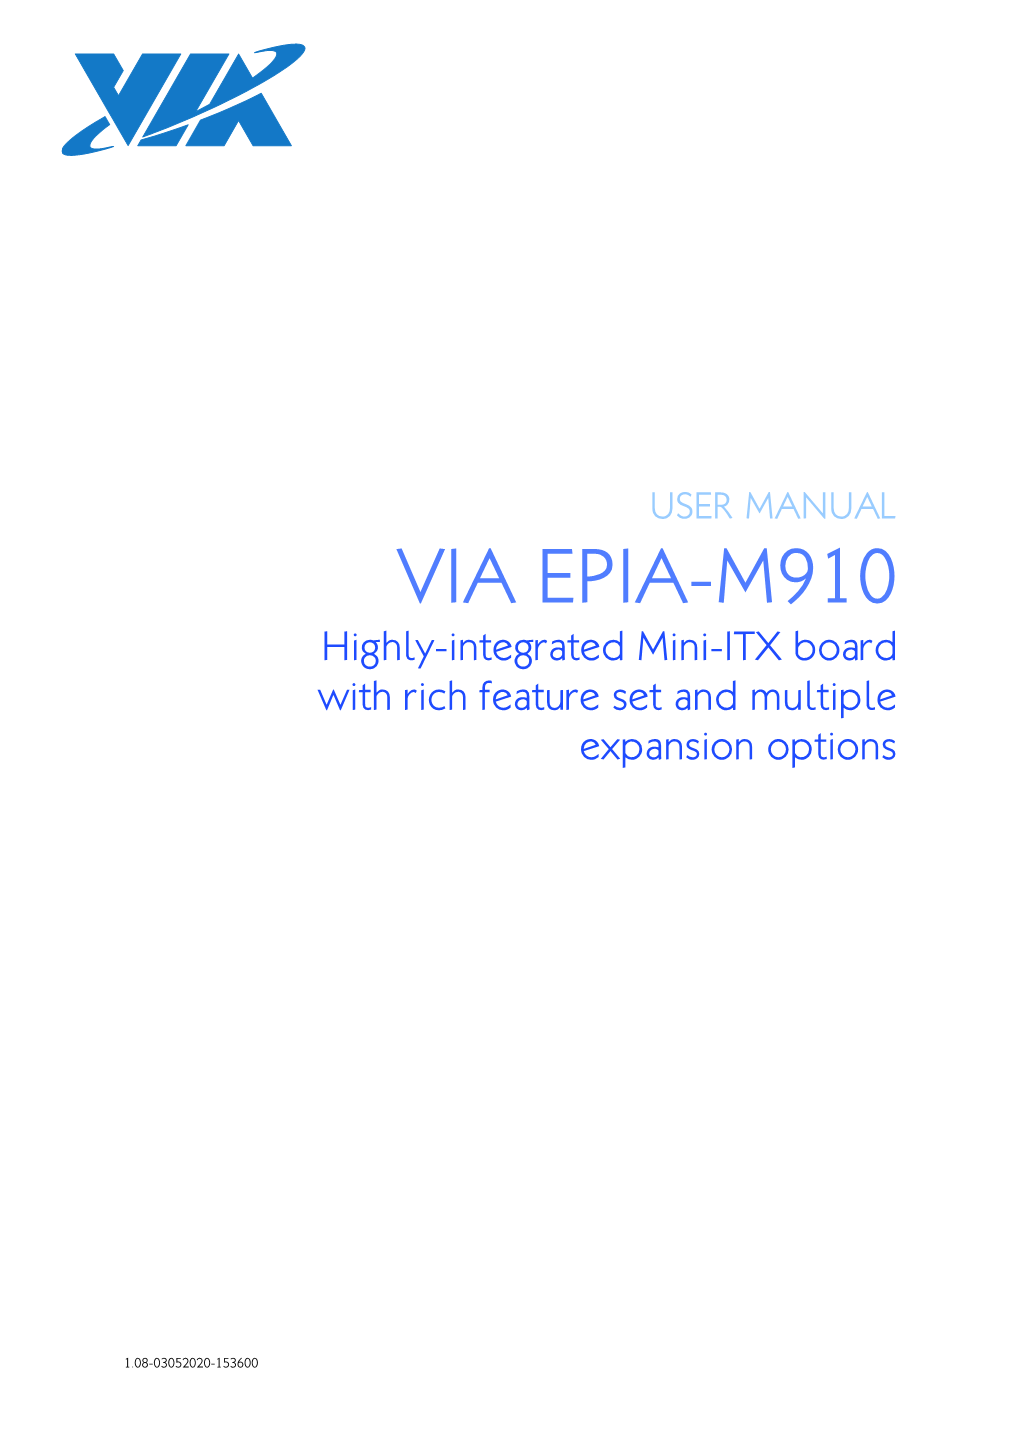 VIA EPIA-M910 Highly-Integrated Mini-ITX Board with Rich Feature Set and Multiple Expansion Options